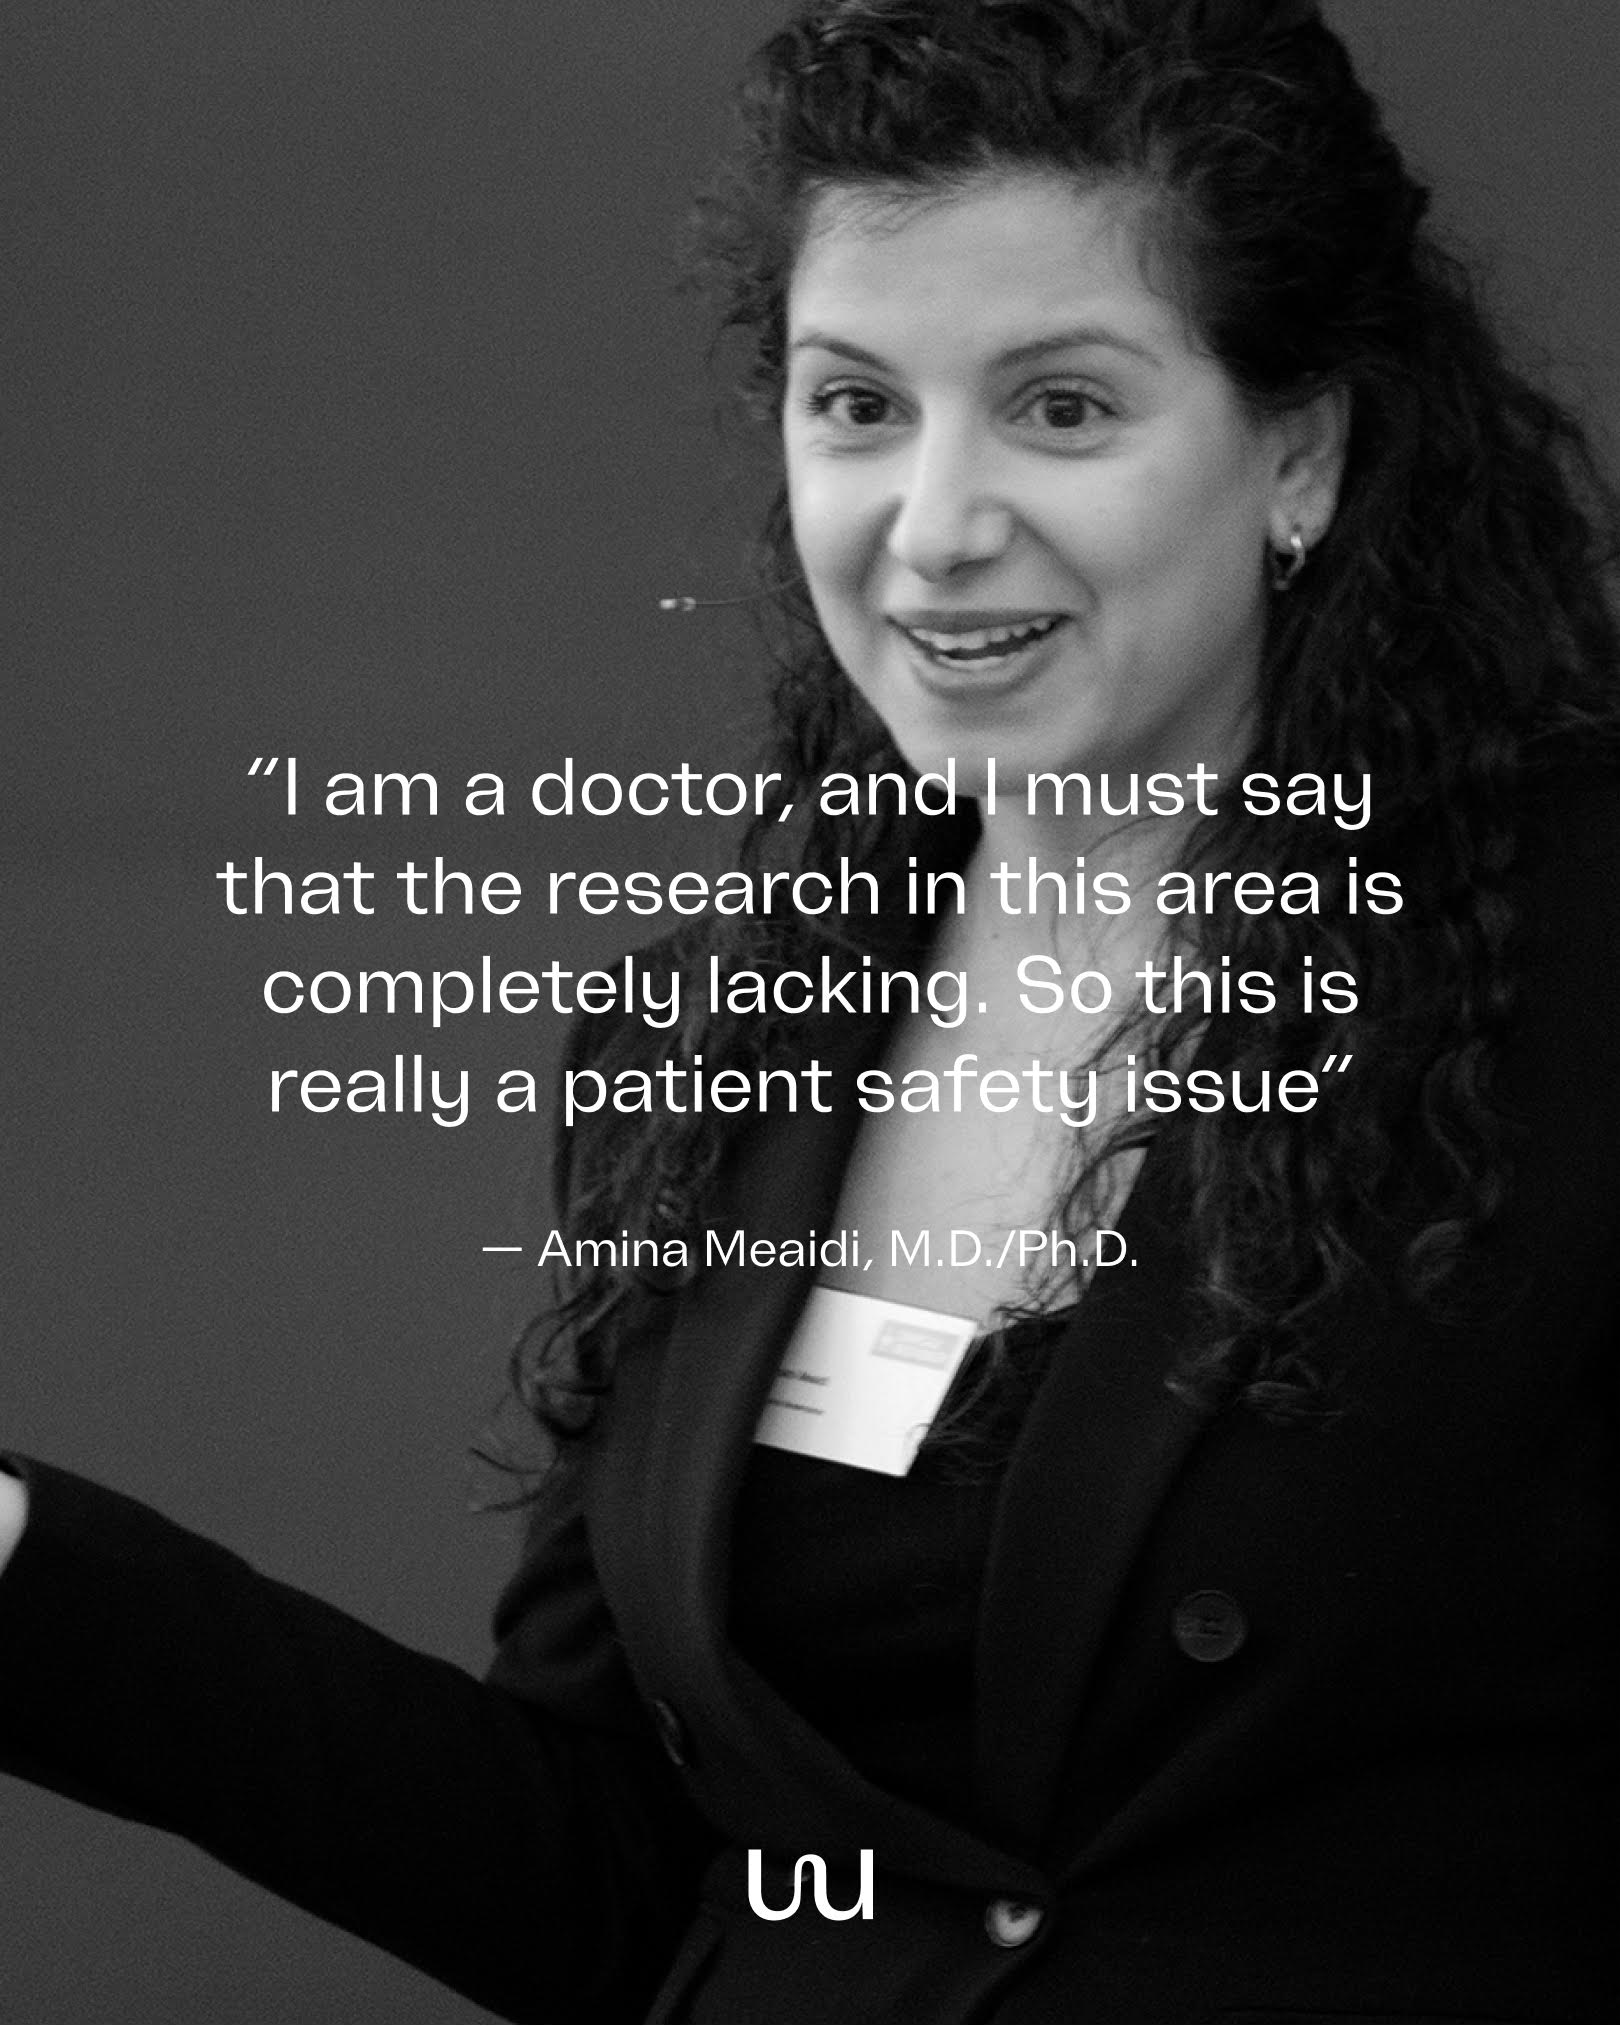 Doctor Amani Meaidi on Safe Choice: "This is really a patient safety issue"